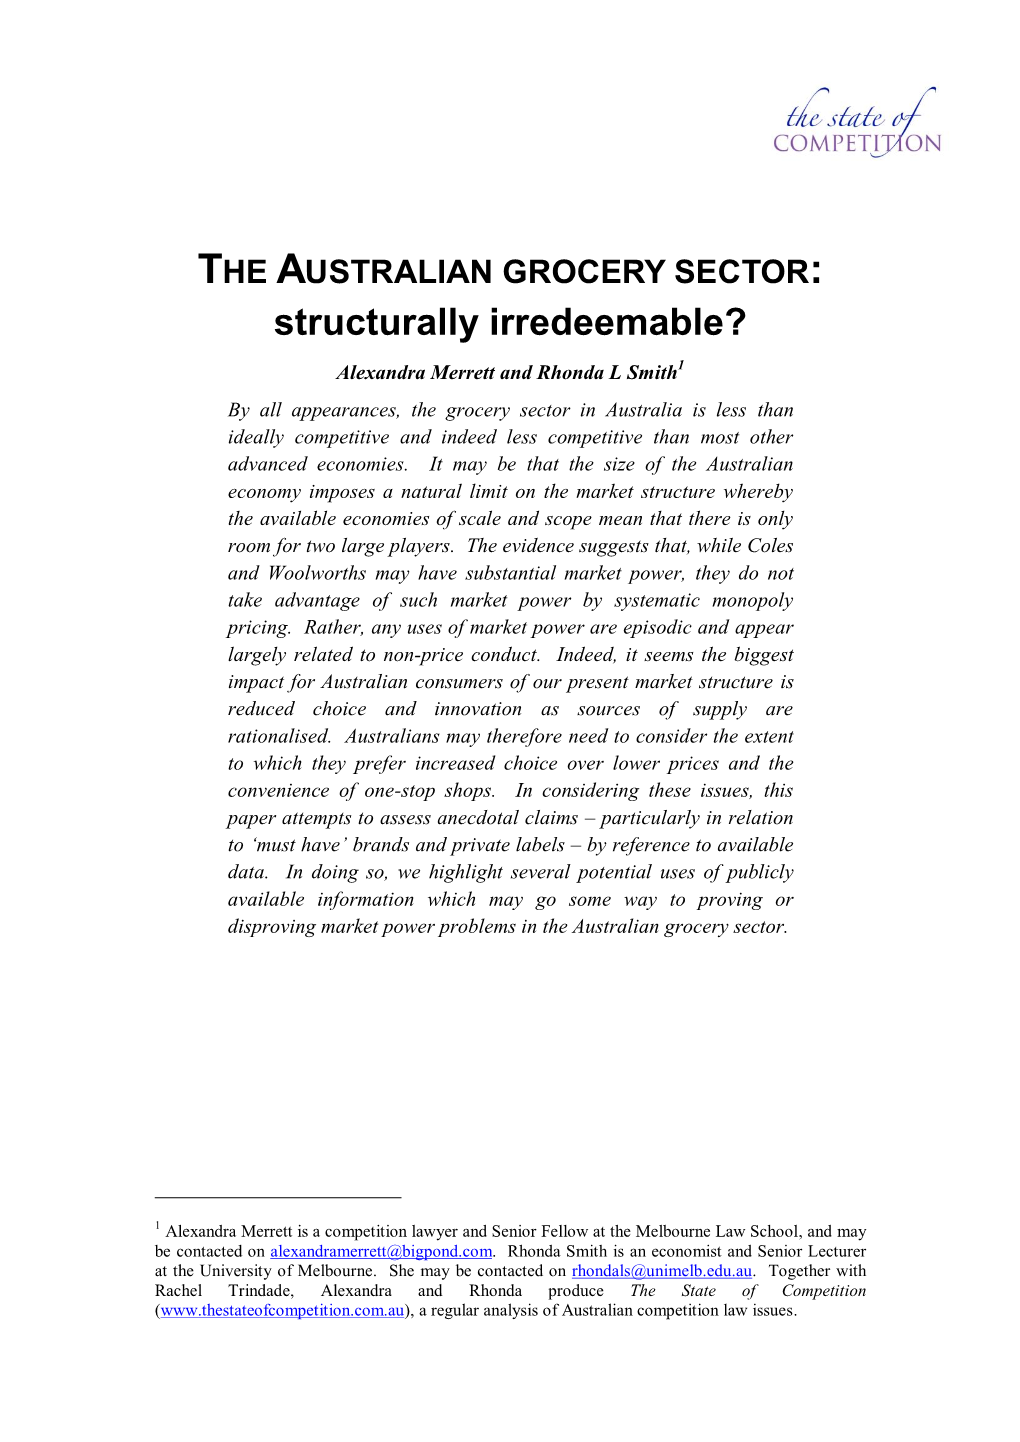 The Australian Grocery Sector: Structurally Irredeemable?